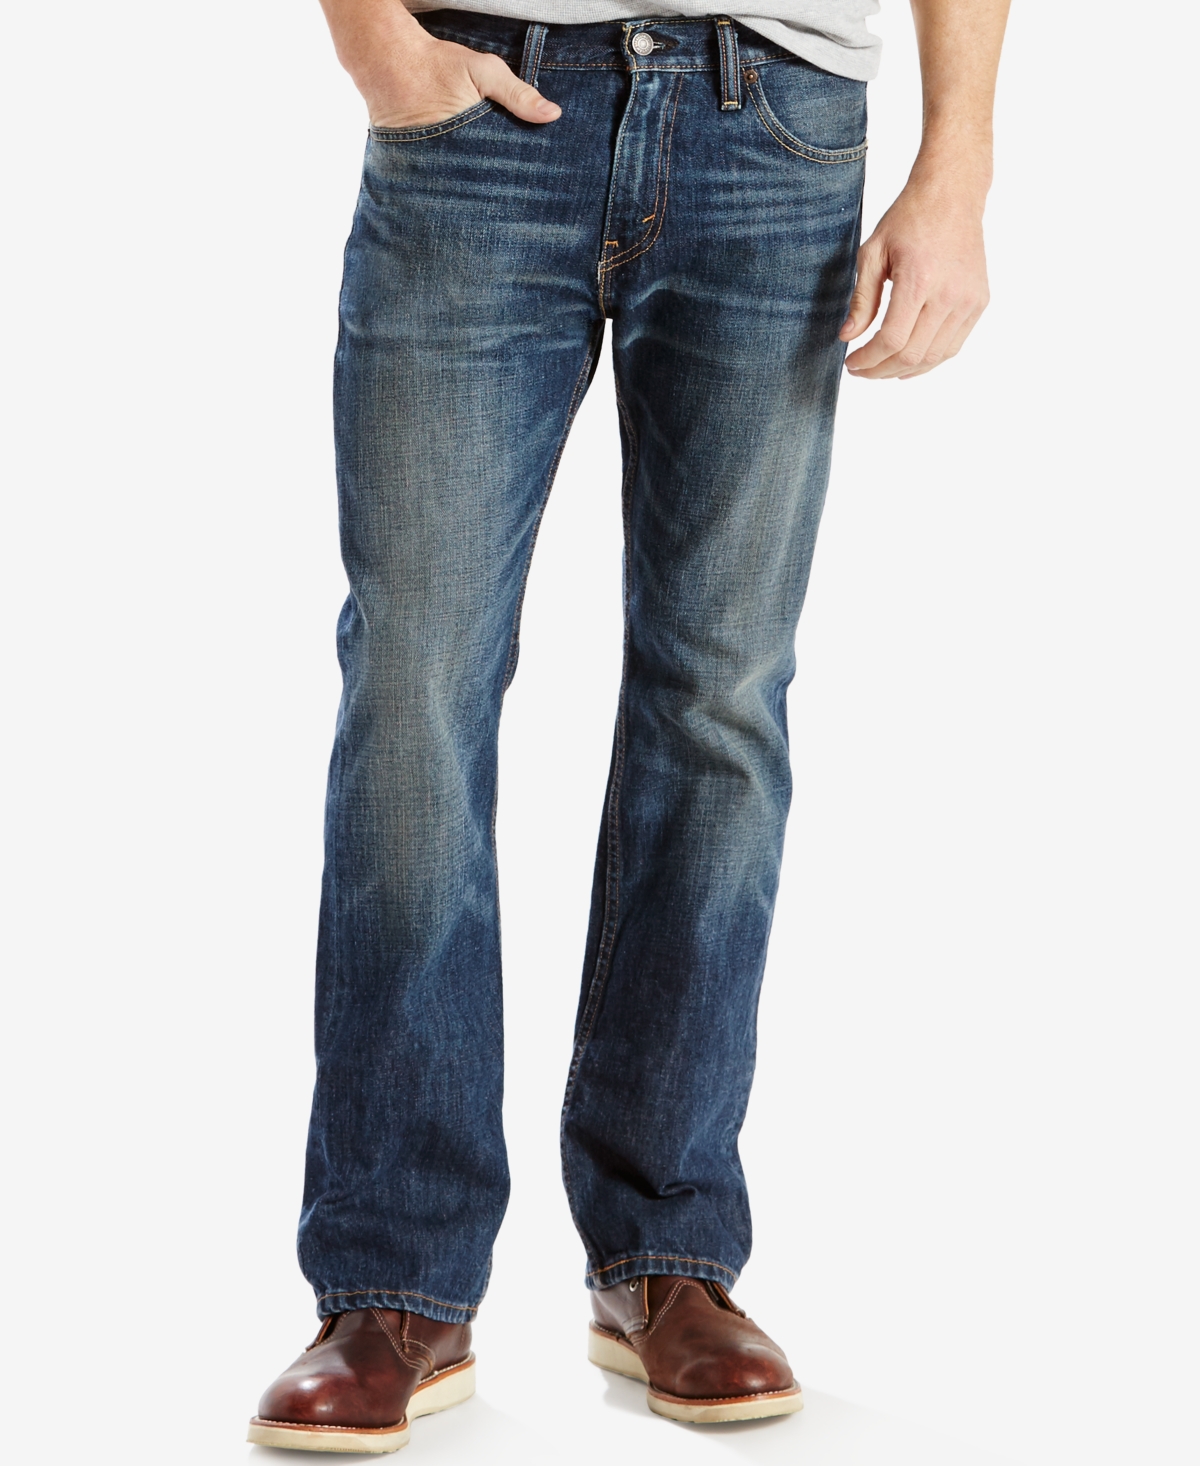 527 Slim Bootcut Fit Jeans - Besides Blues Stretch